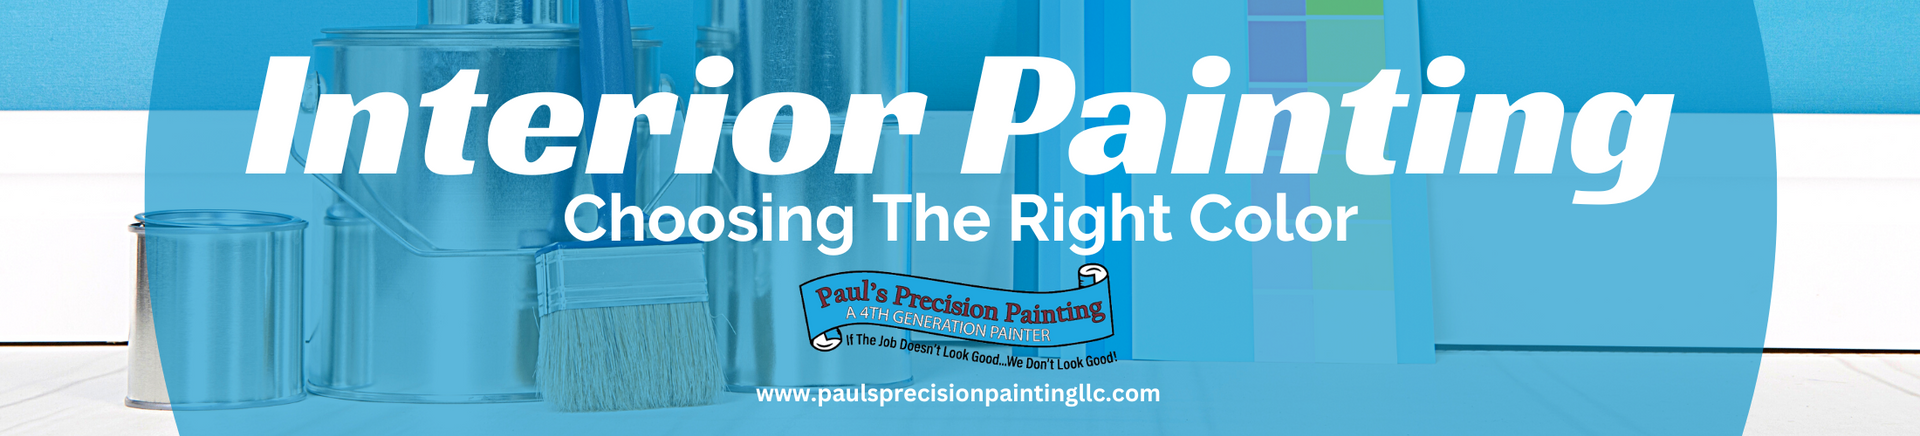 Interior Painters in Boise Idaho - Paul's Precision Painting